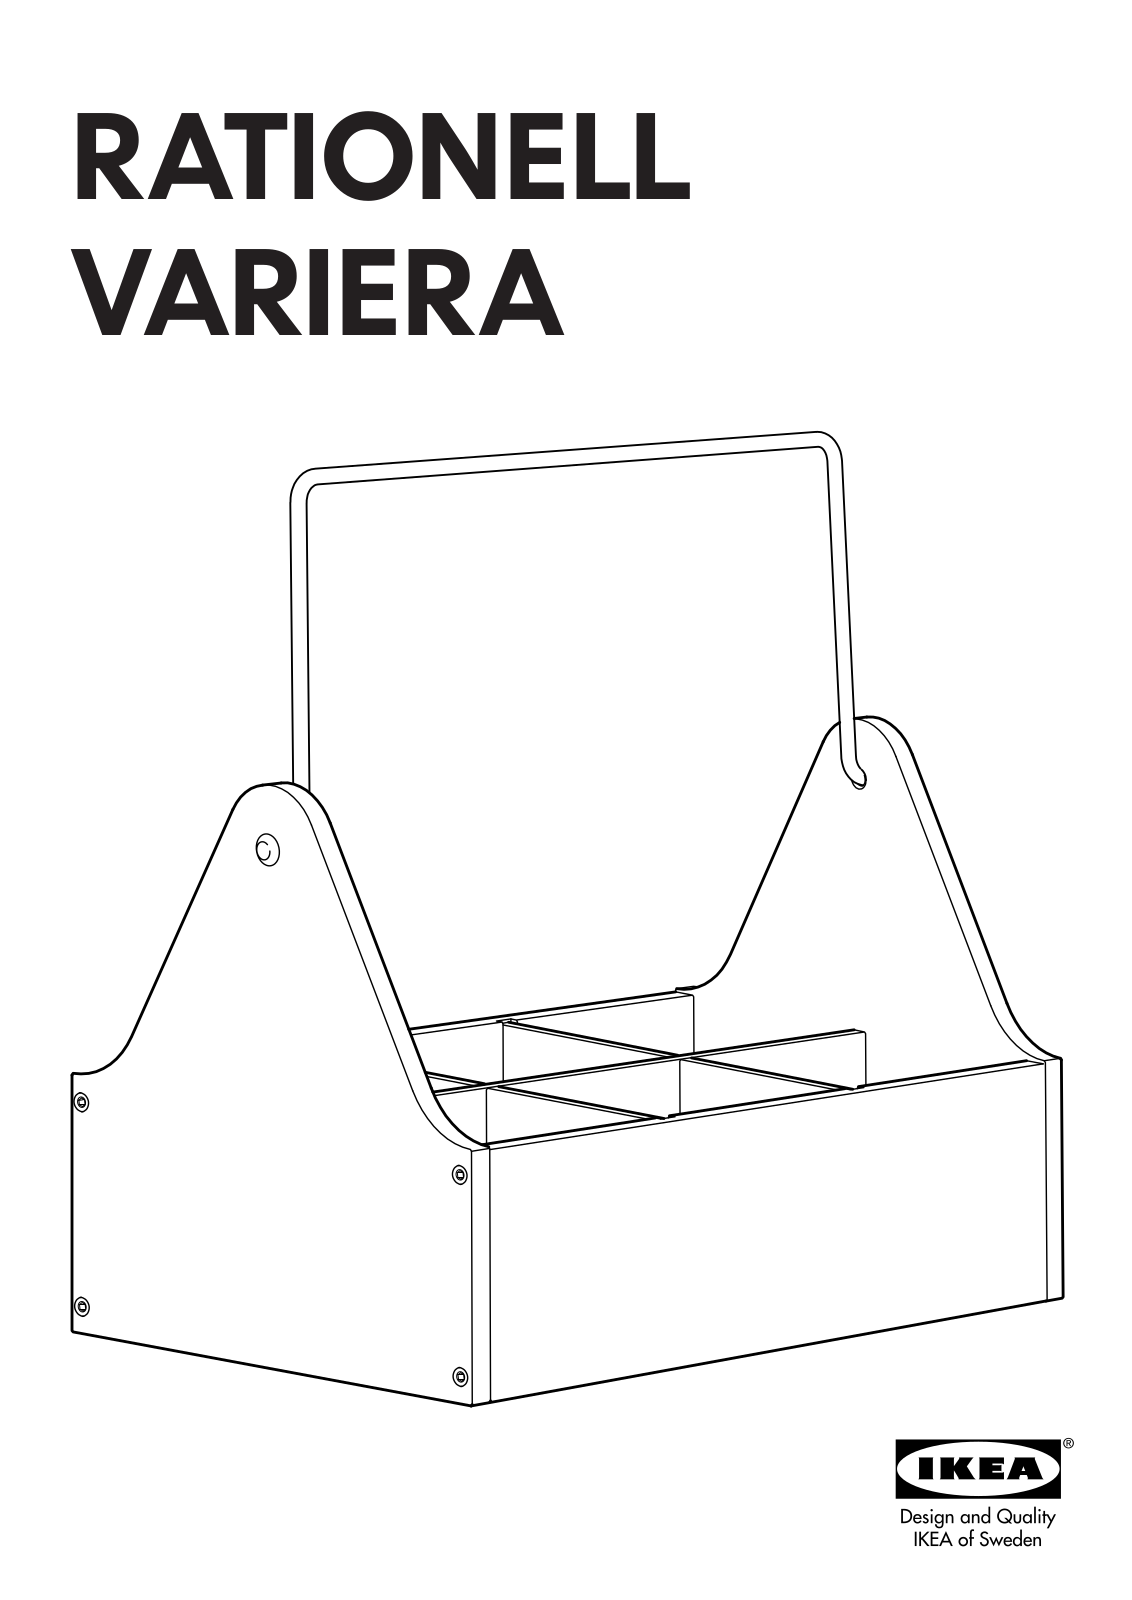 IKEA RATIONELL VARIERA BOX-HANDLE Assembly Instruction